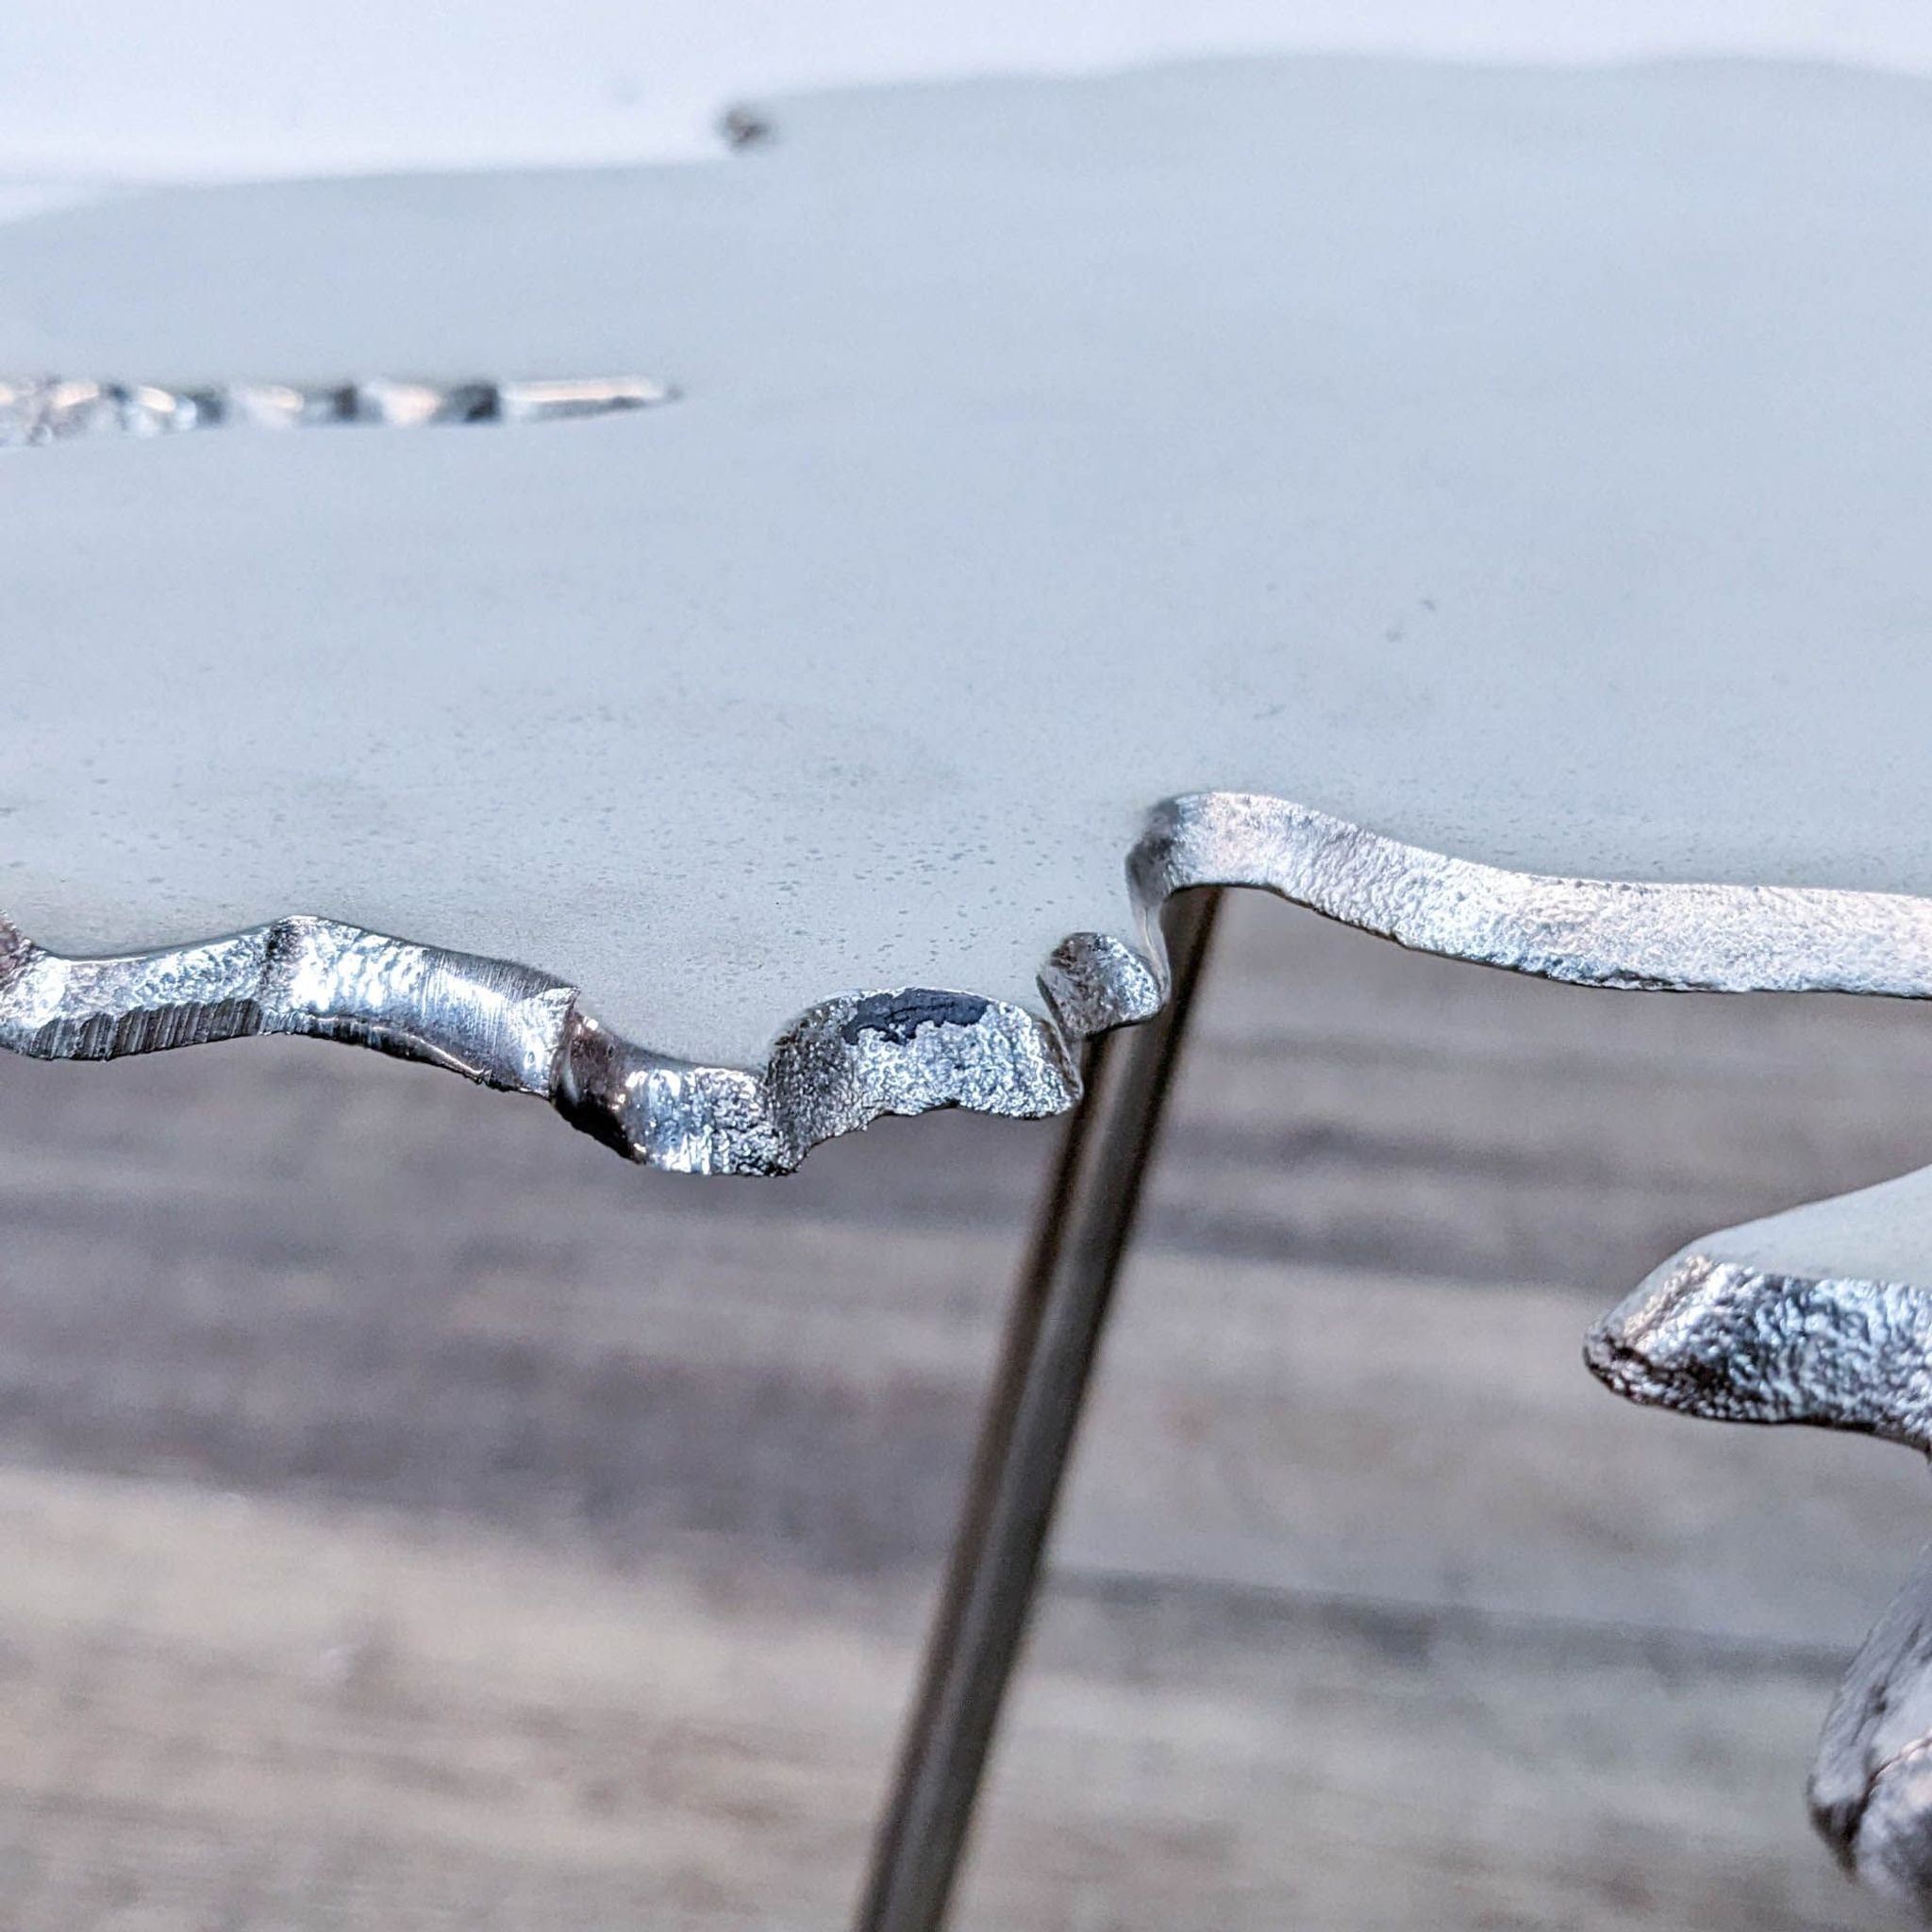 Detail of the Reperch end table's edge, showing the textured, irregular border and one of the supporting metal legs.